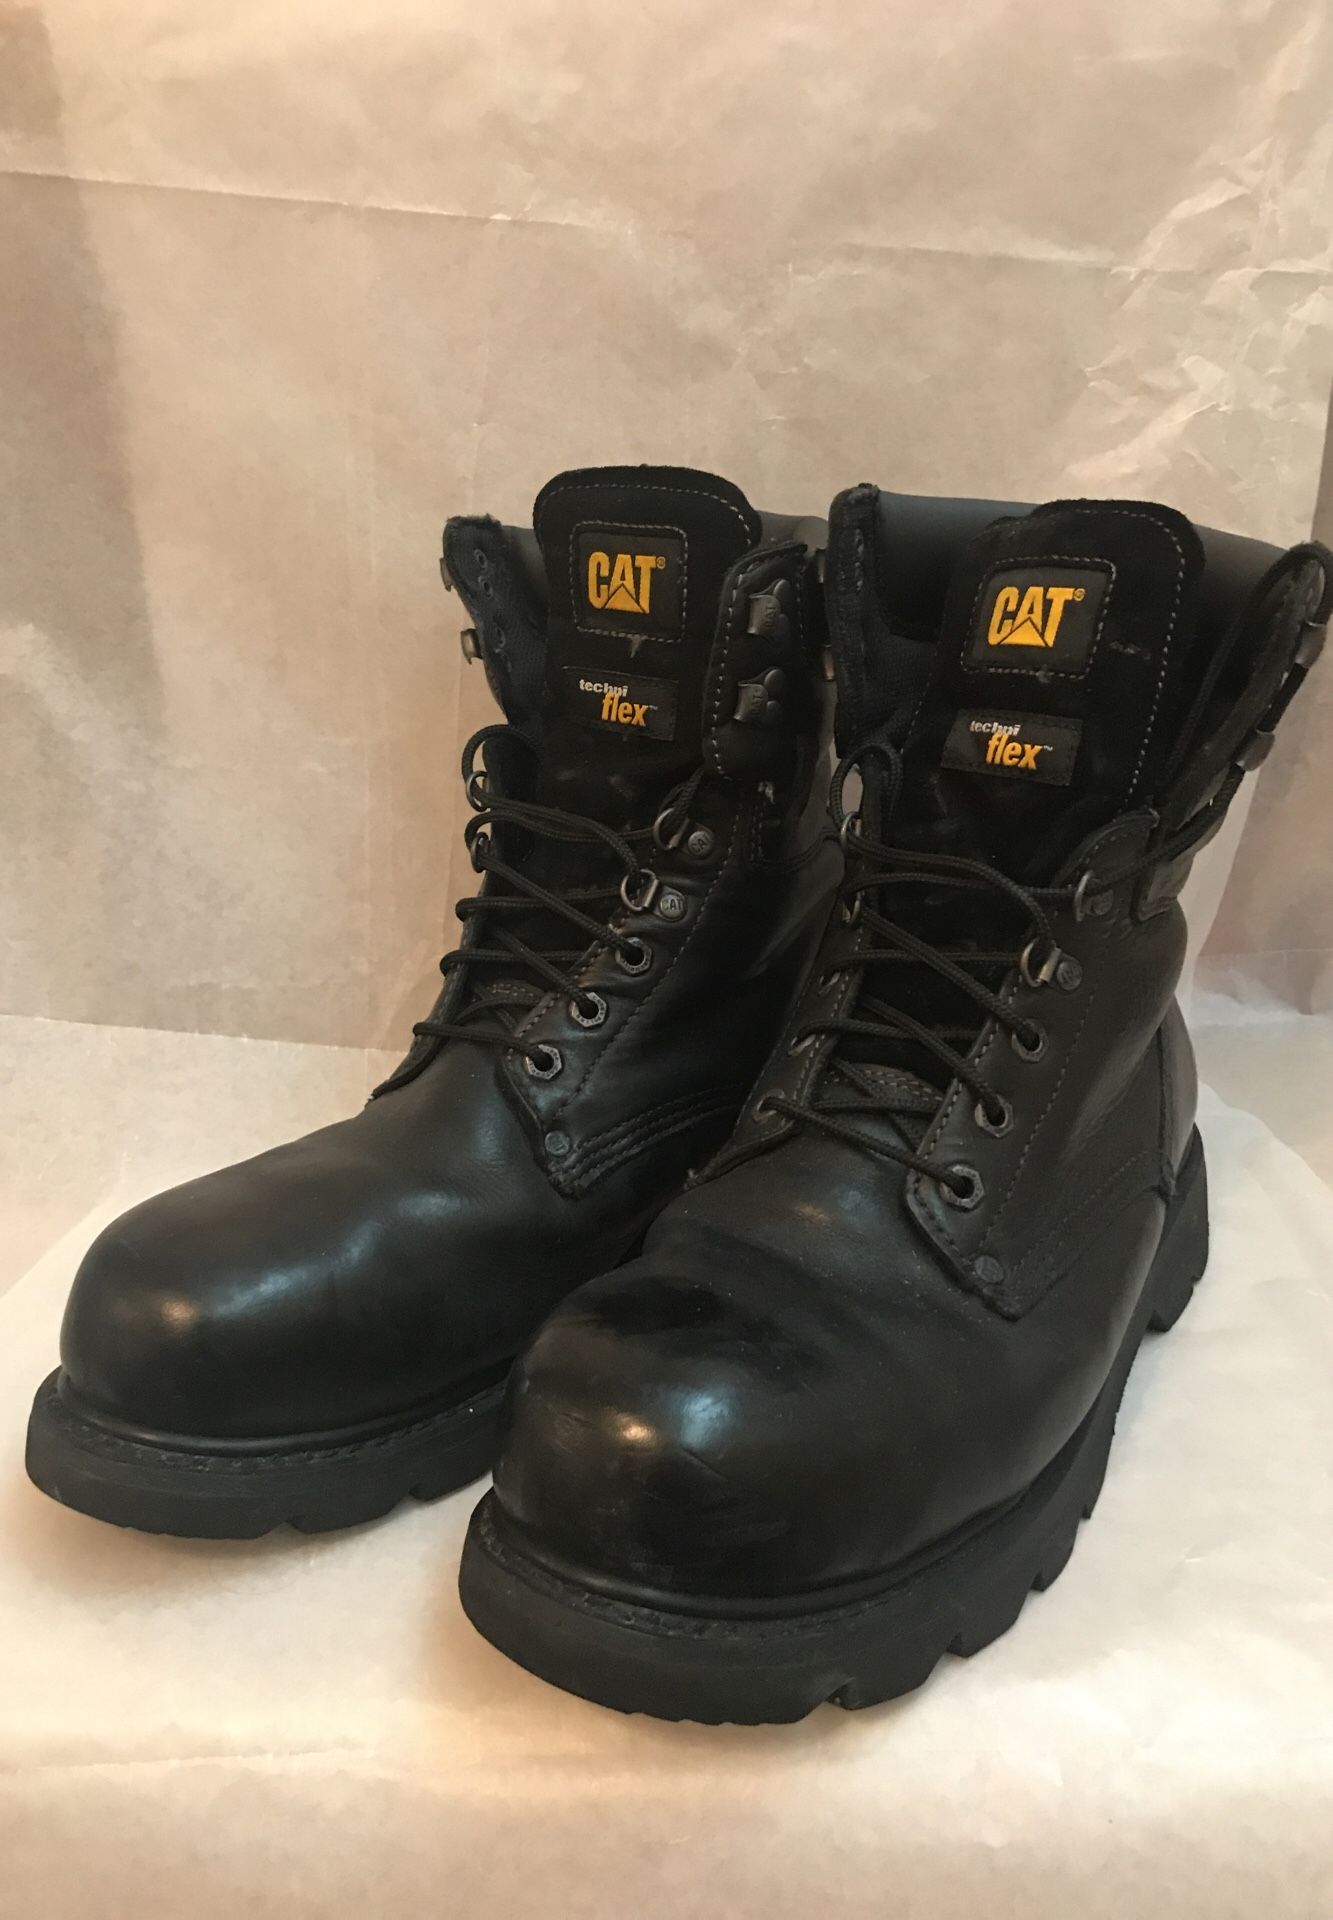 Cat work boots